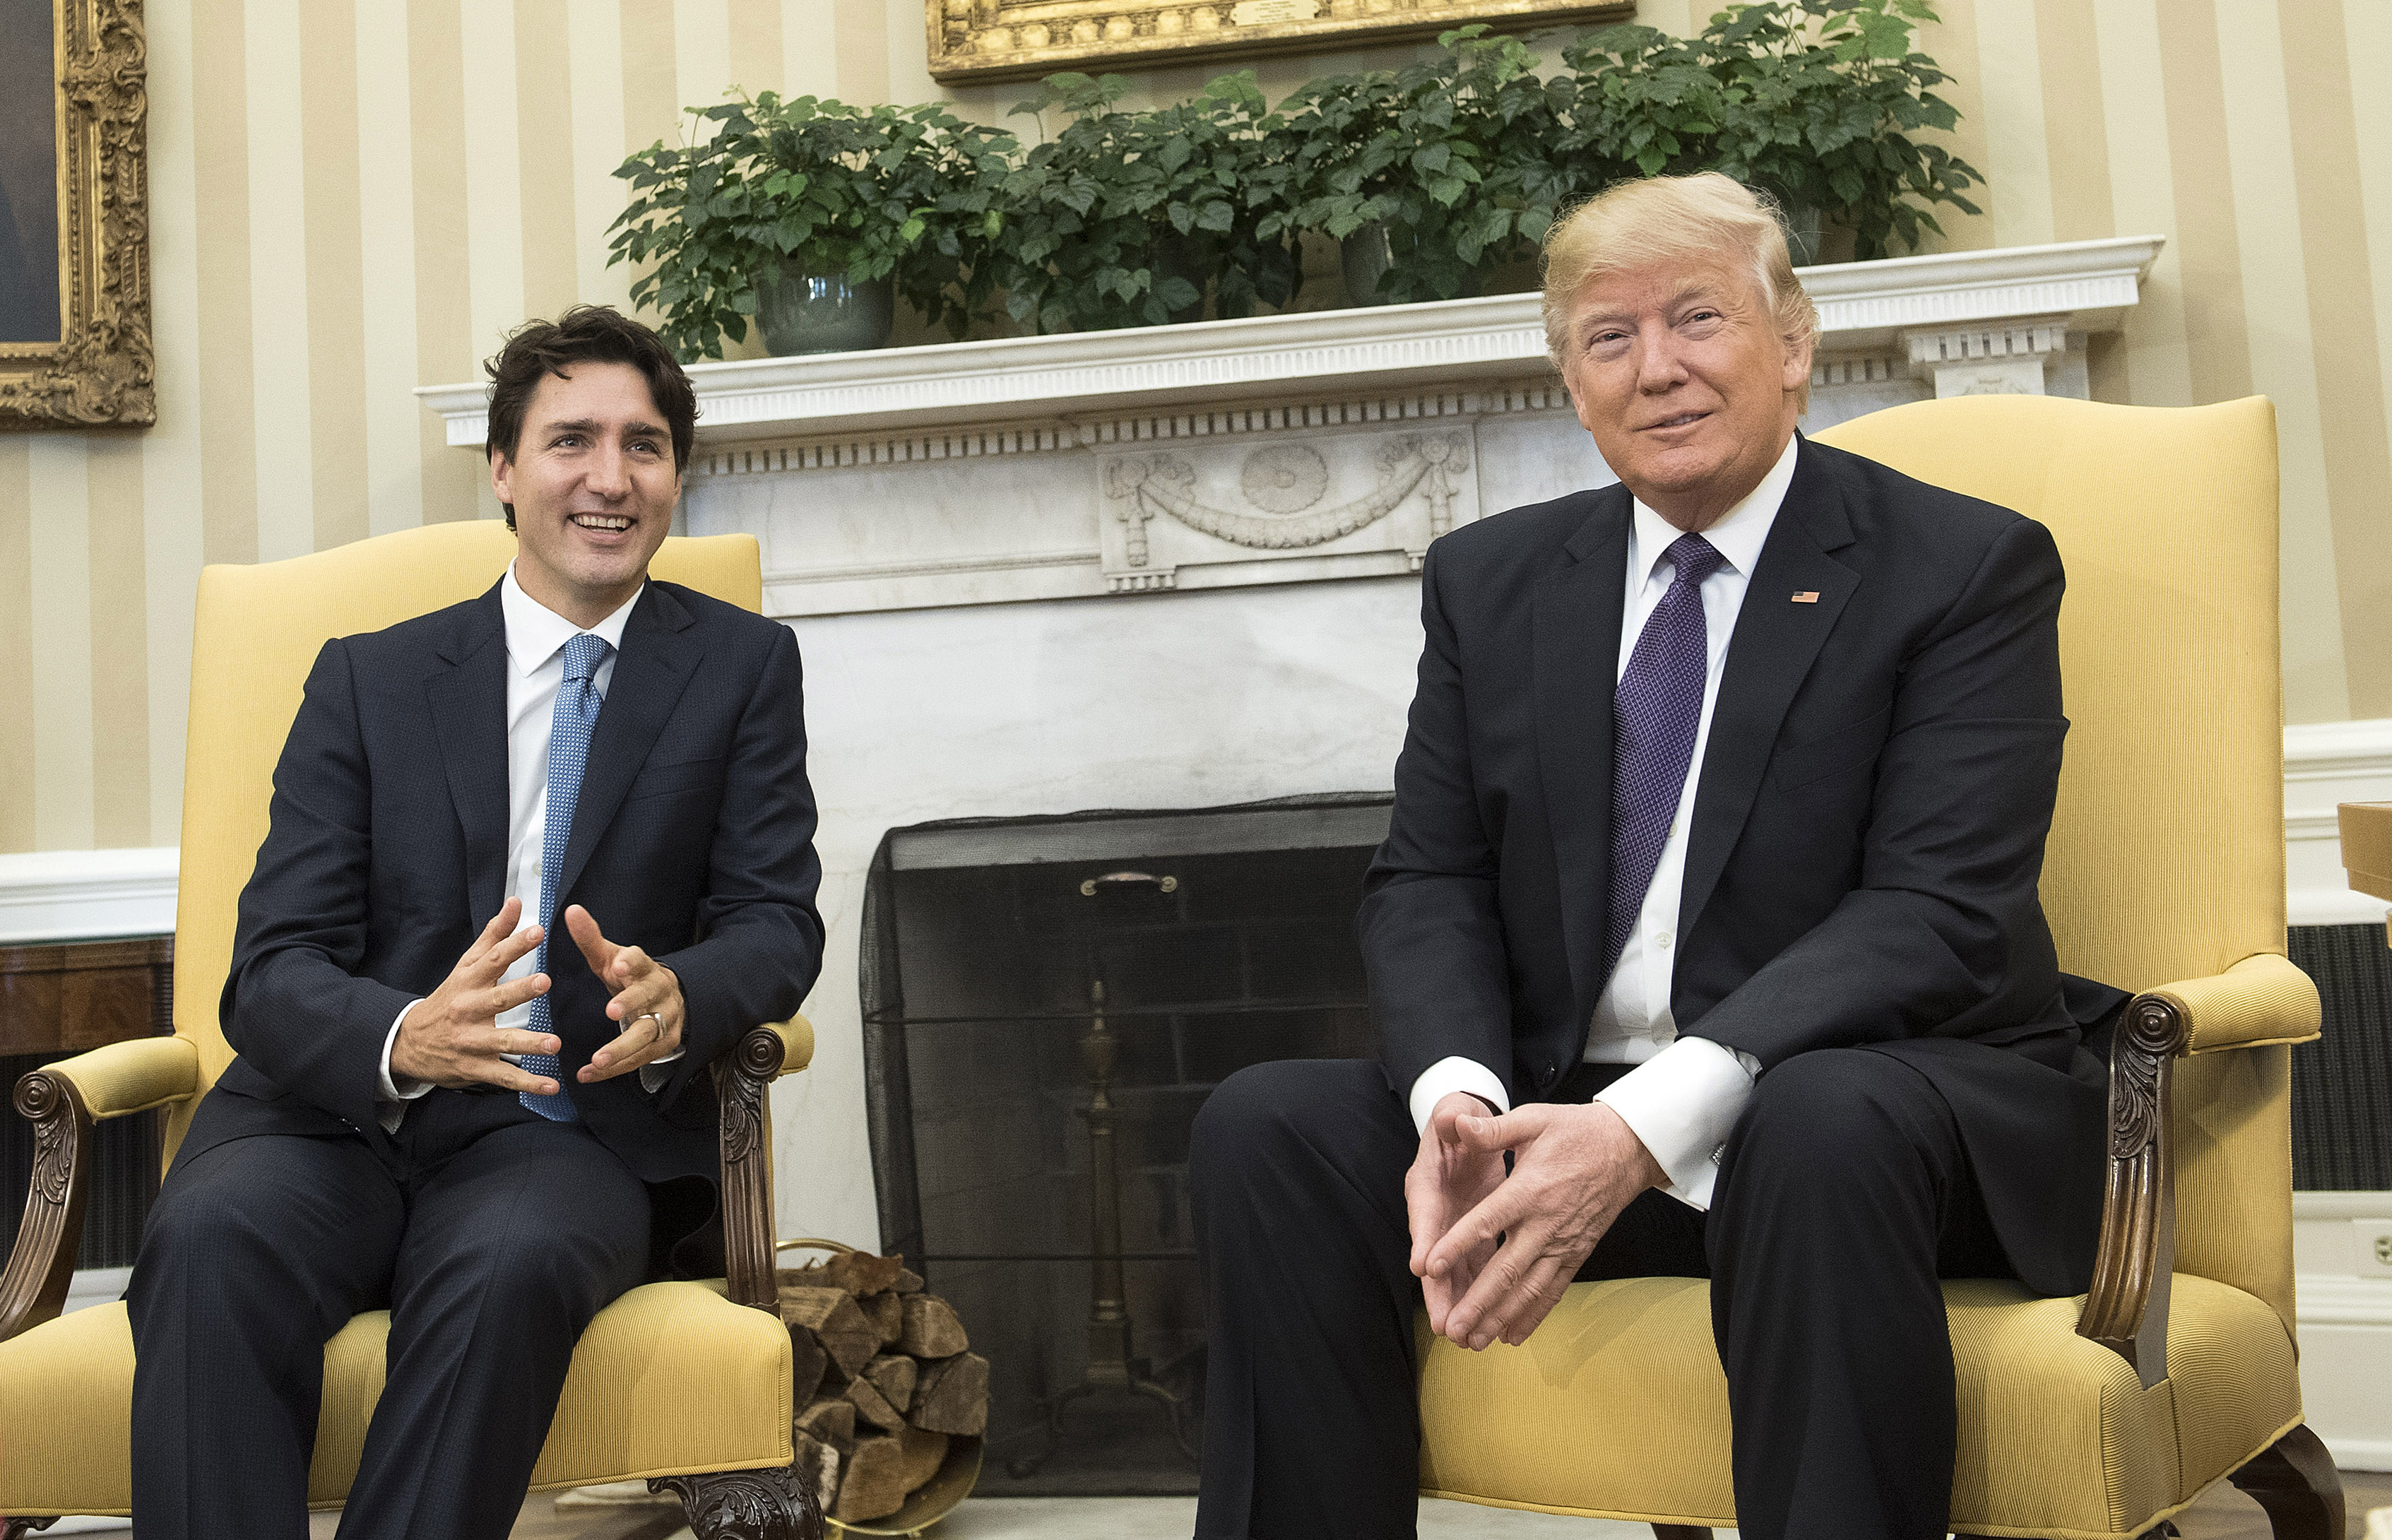 U.S. President Donald Trump (R) meets with Prime Minister Justin Trudeau of Canada in the Oval Office at the White House on February 13, 2017 in Washington, D.C. This is the first time the two leaders are meeting at the White House. (Photo by Kevin Dietsch—Pool/Getty)